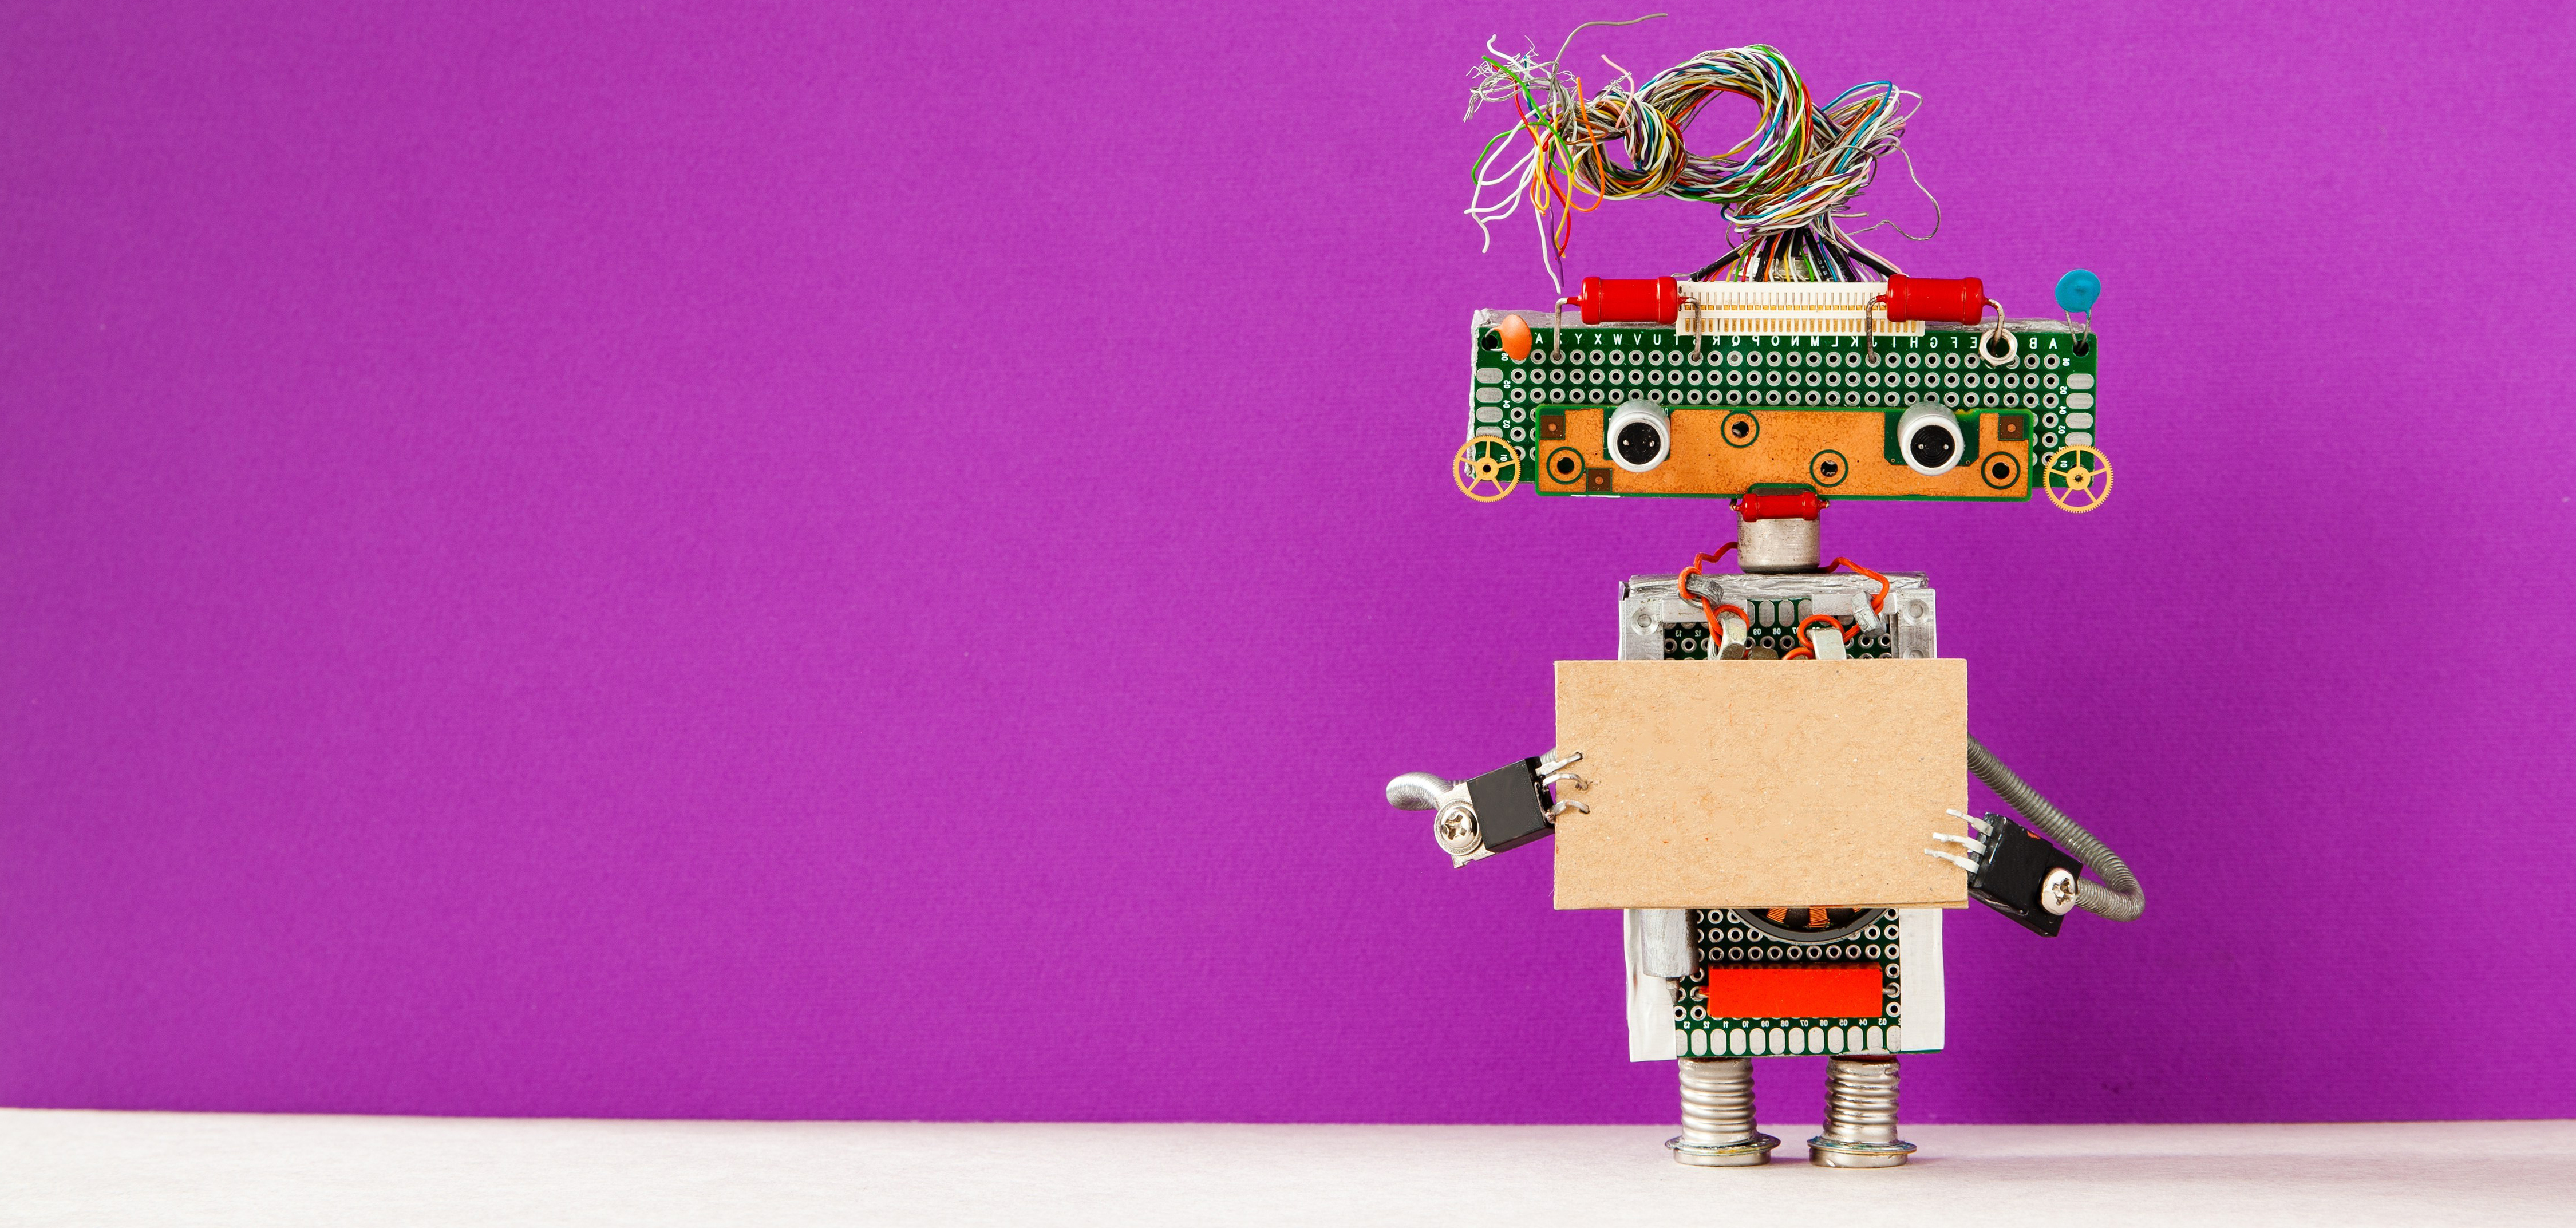 Robot with a cardboard card mockup. Creative design robotic toy holding a blank empty paper poster, purple wall background. Programs for Scouts - Girl Scouts Robotics Workshop